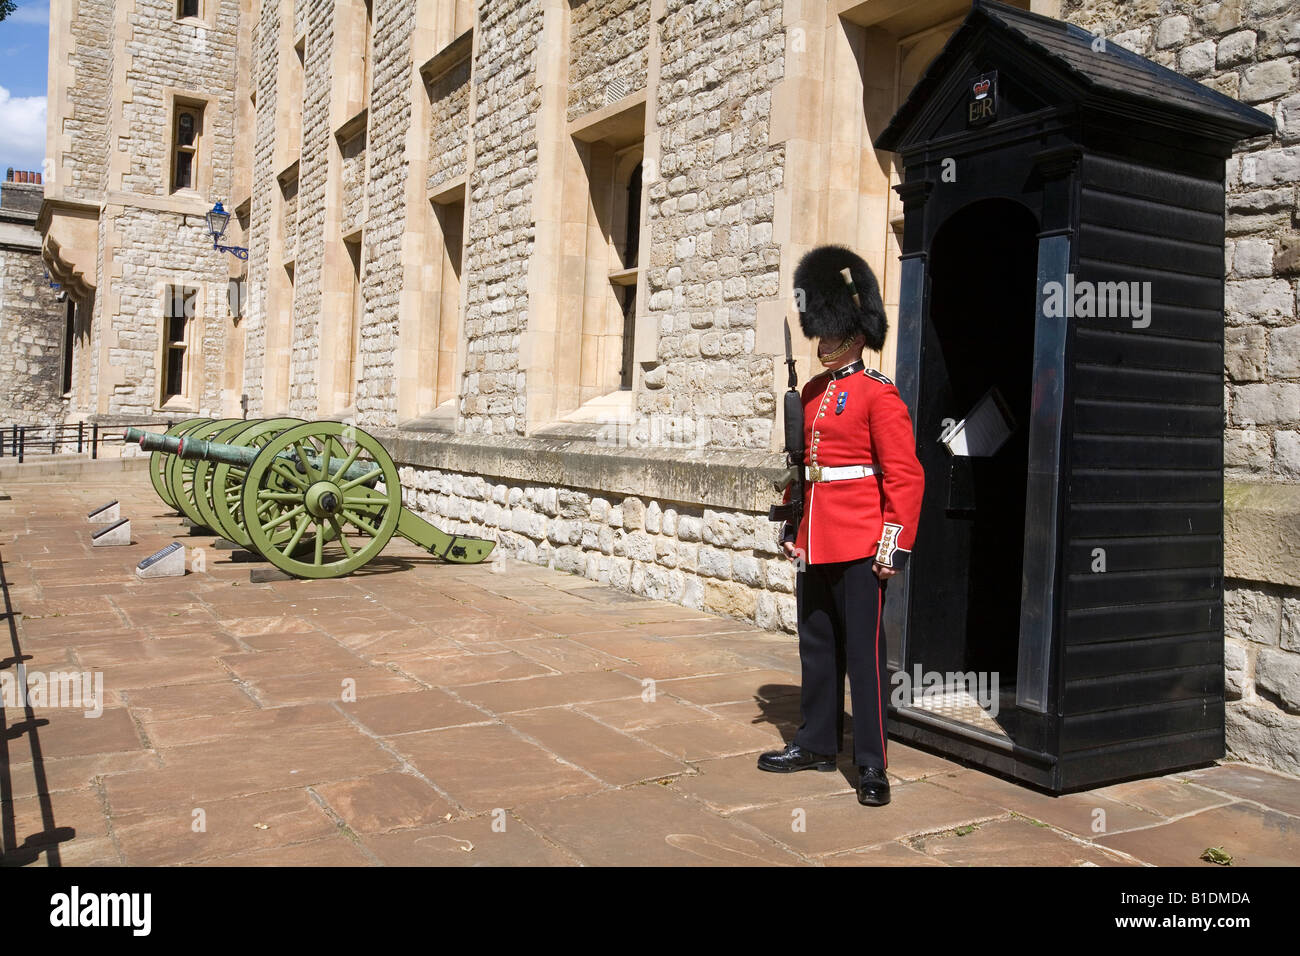 Royal Guard on duty outside the 'Jewel House' at the 'Tower of London' City of London England Britain UK Stock Photo